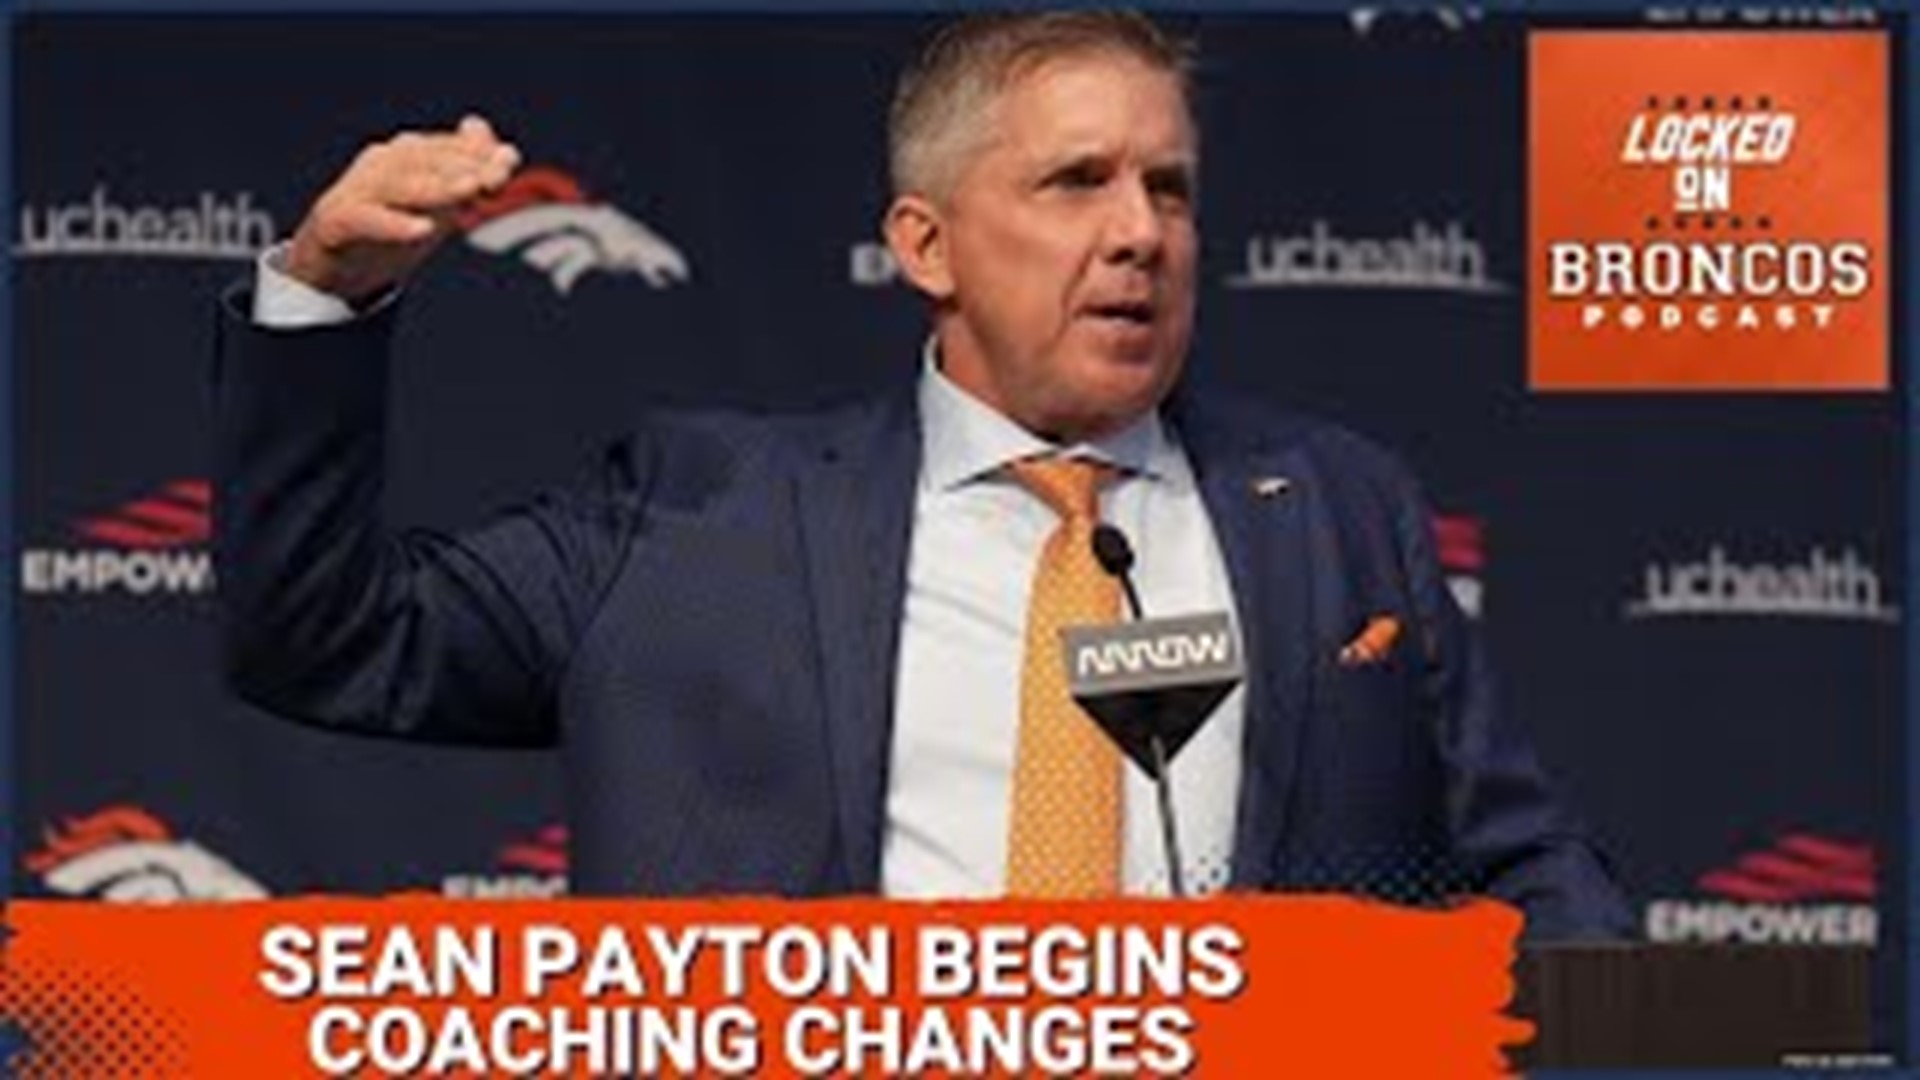 Several assistant coaches from the Broncos staff last year will be moving on, while Payton has already made a hire to coach the Broncos offensive line.